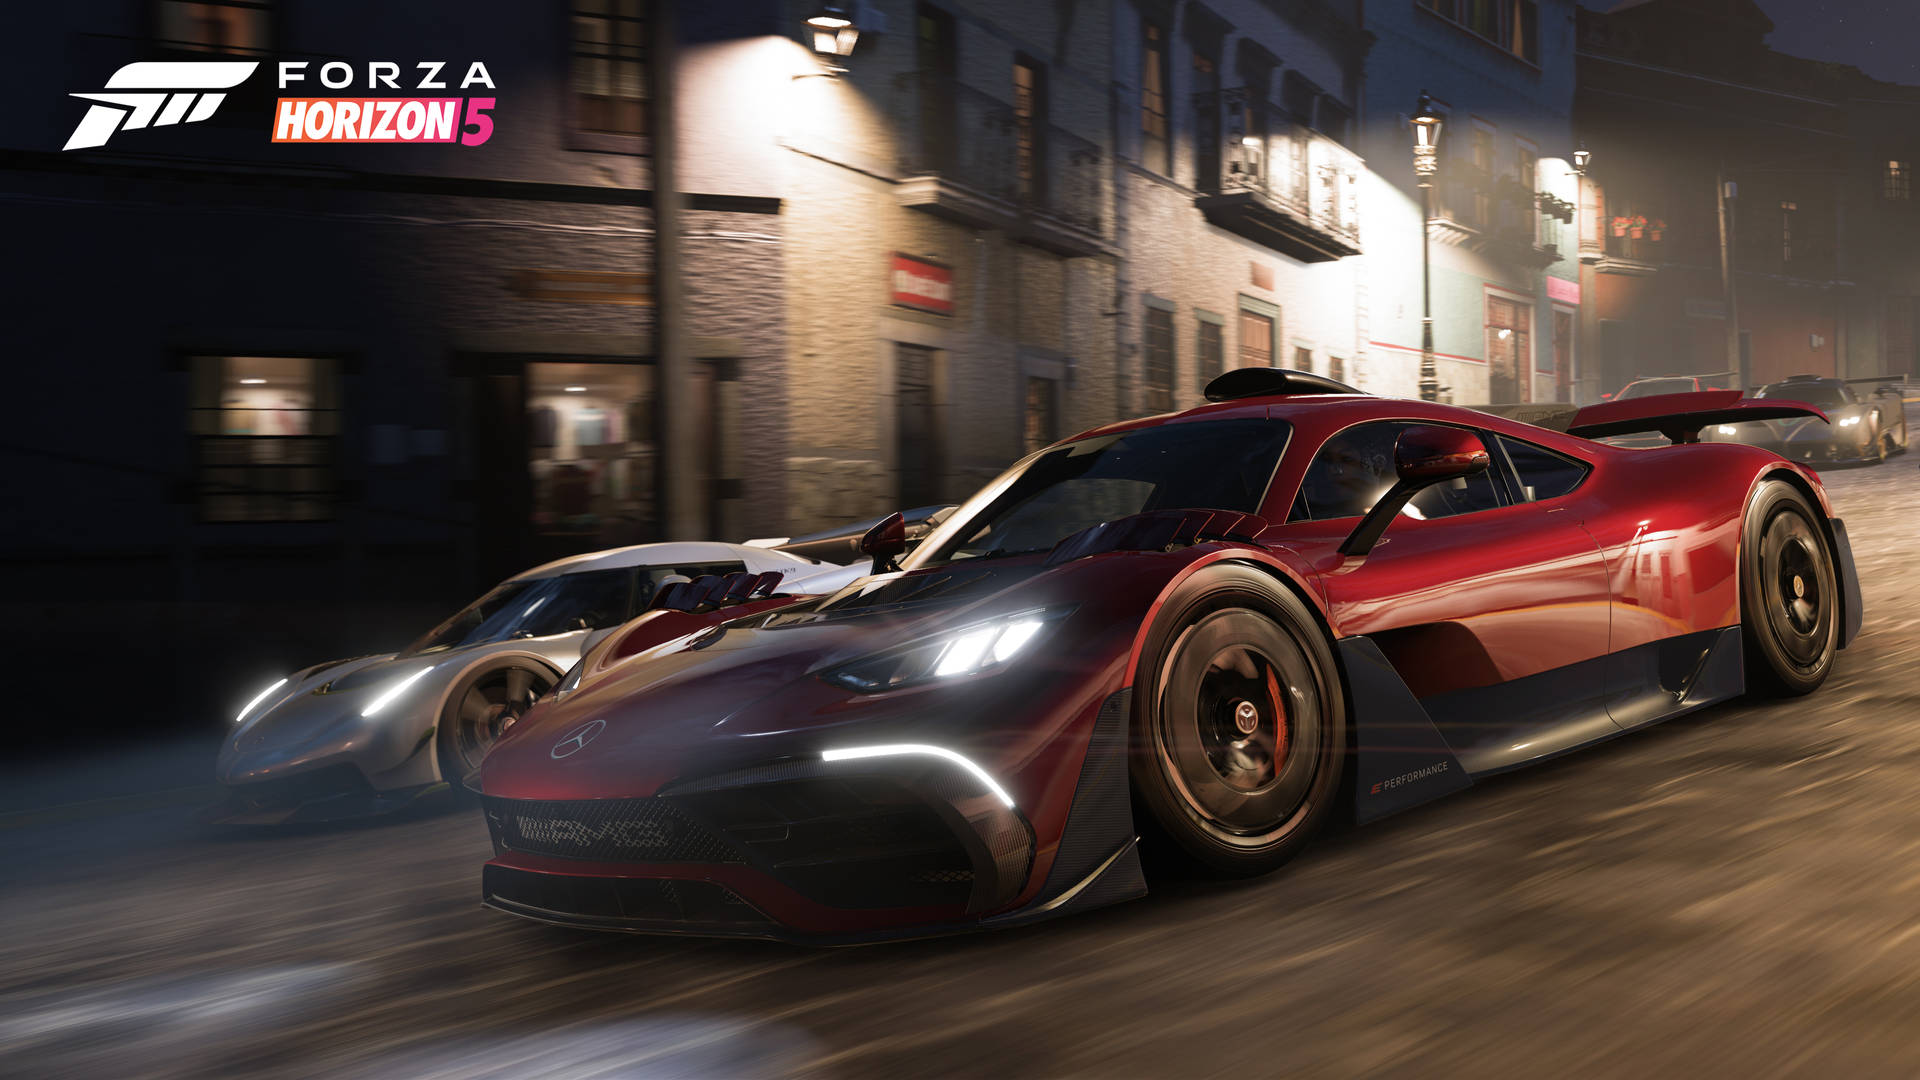 Ready to take your gaming to the next level? Forza Gaming gives you the edge. Wallpaper